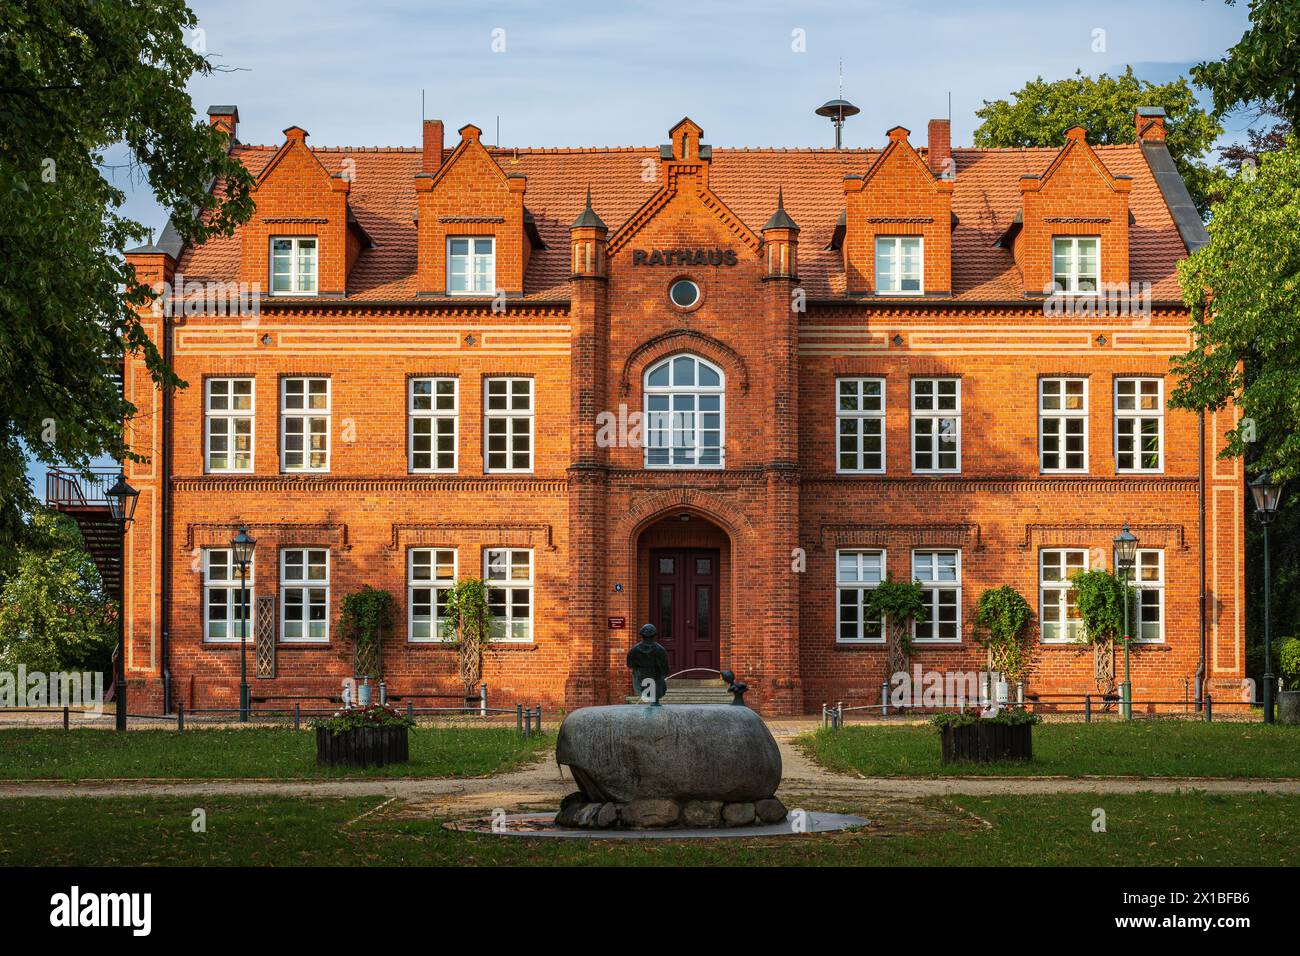 Historic town hall of Dargun, the former Red School, a listed building from the Wilhelminian era in Dargun, Mecklenburg-Western Pomerania, Germany. Stock Photo